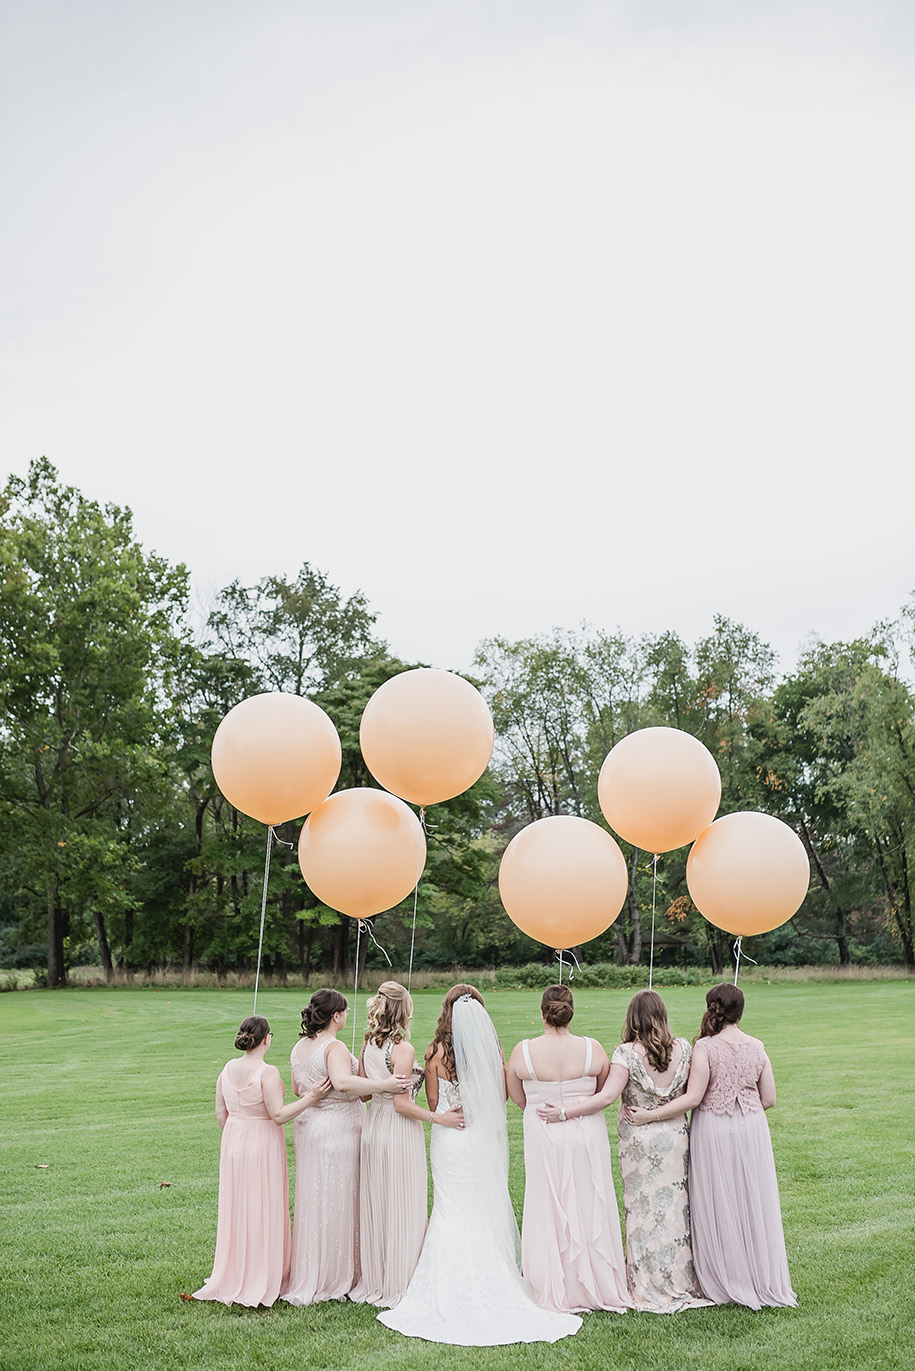 Bridesmaids in blush with giant balloons! The bride wore a sweetheart shaped strapless dress with a fitted bodice, lace overlay and short train without a bustle. The bridesmaids each chose their own dress in various shades of blush and sequins.